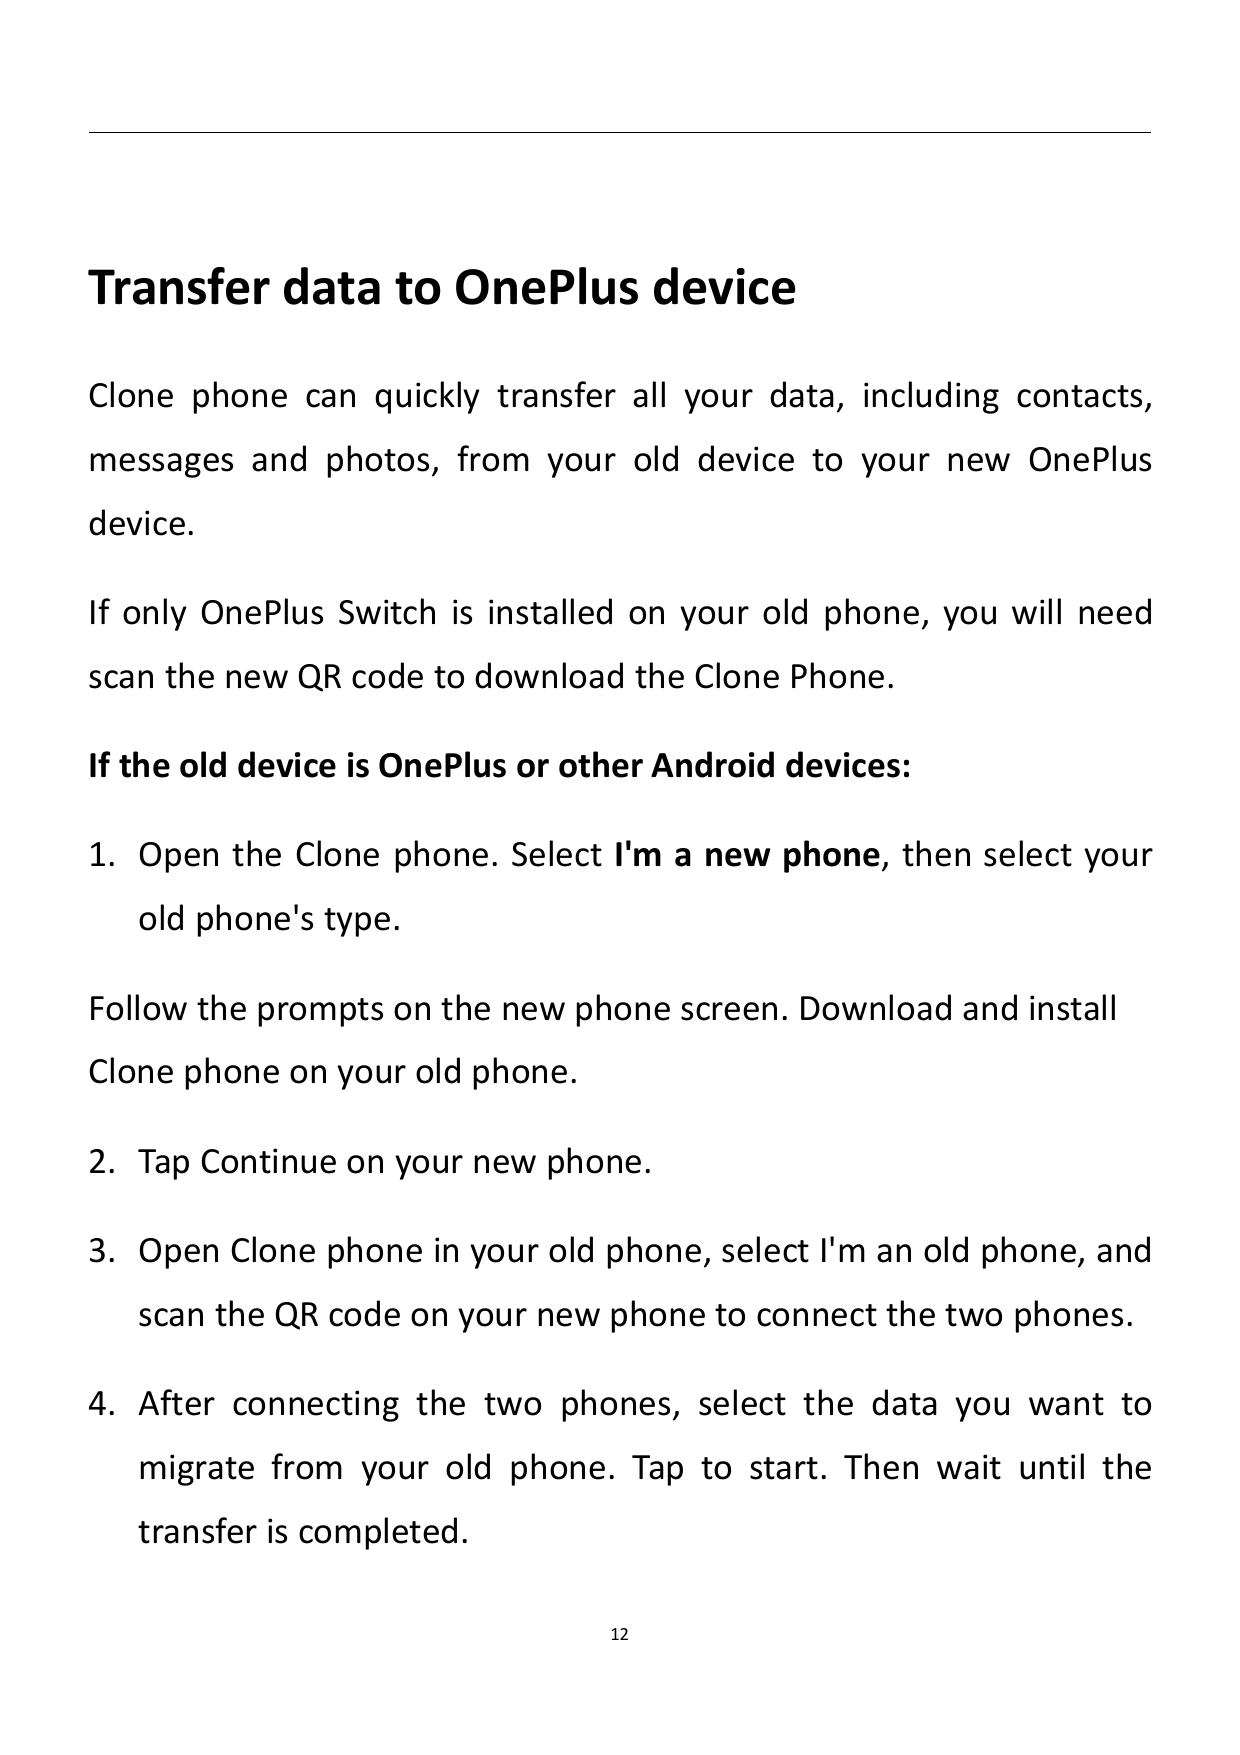 Transfer data to OnePlus deviceClone phone can quickly transfer all your data, including contacts,messages and photos, from your